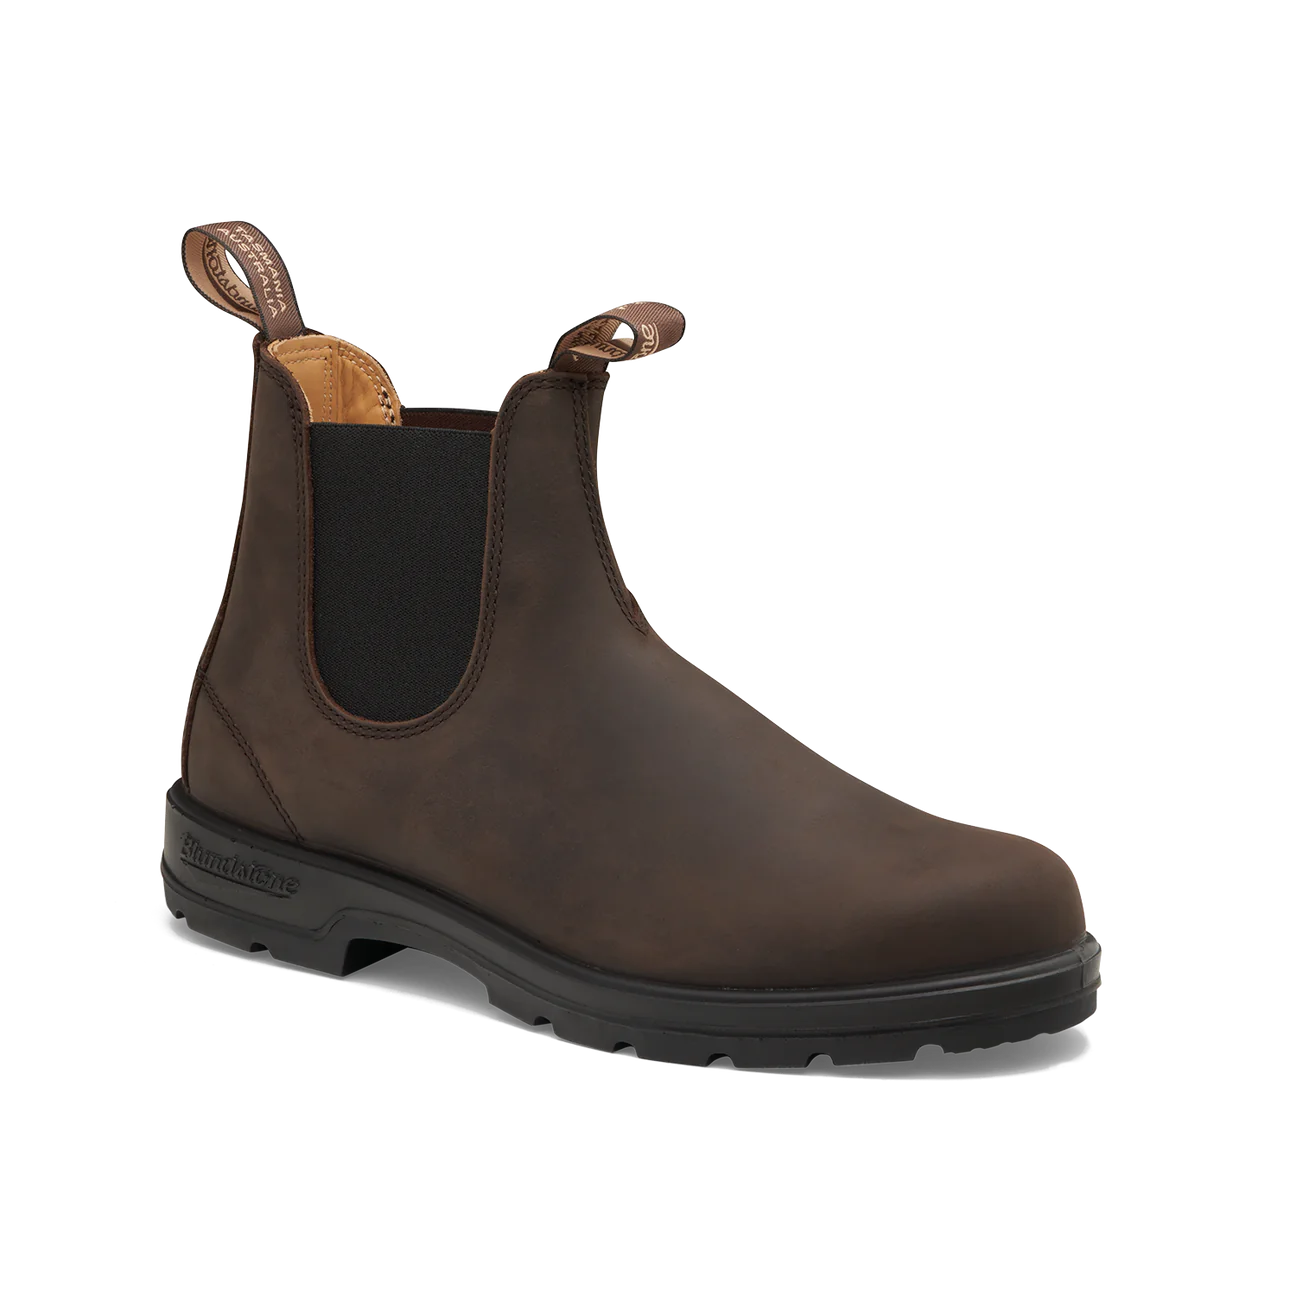 Blundstone 2340 Classic Brown Boot